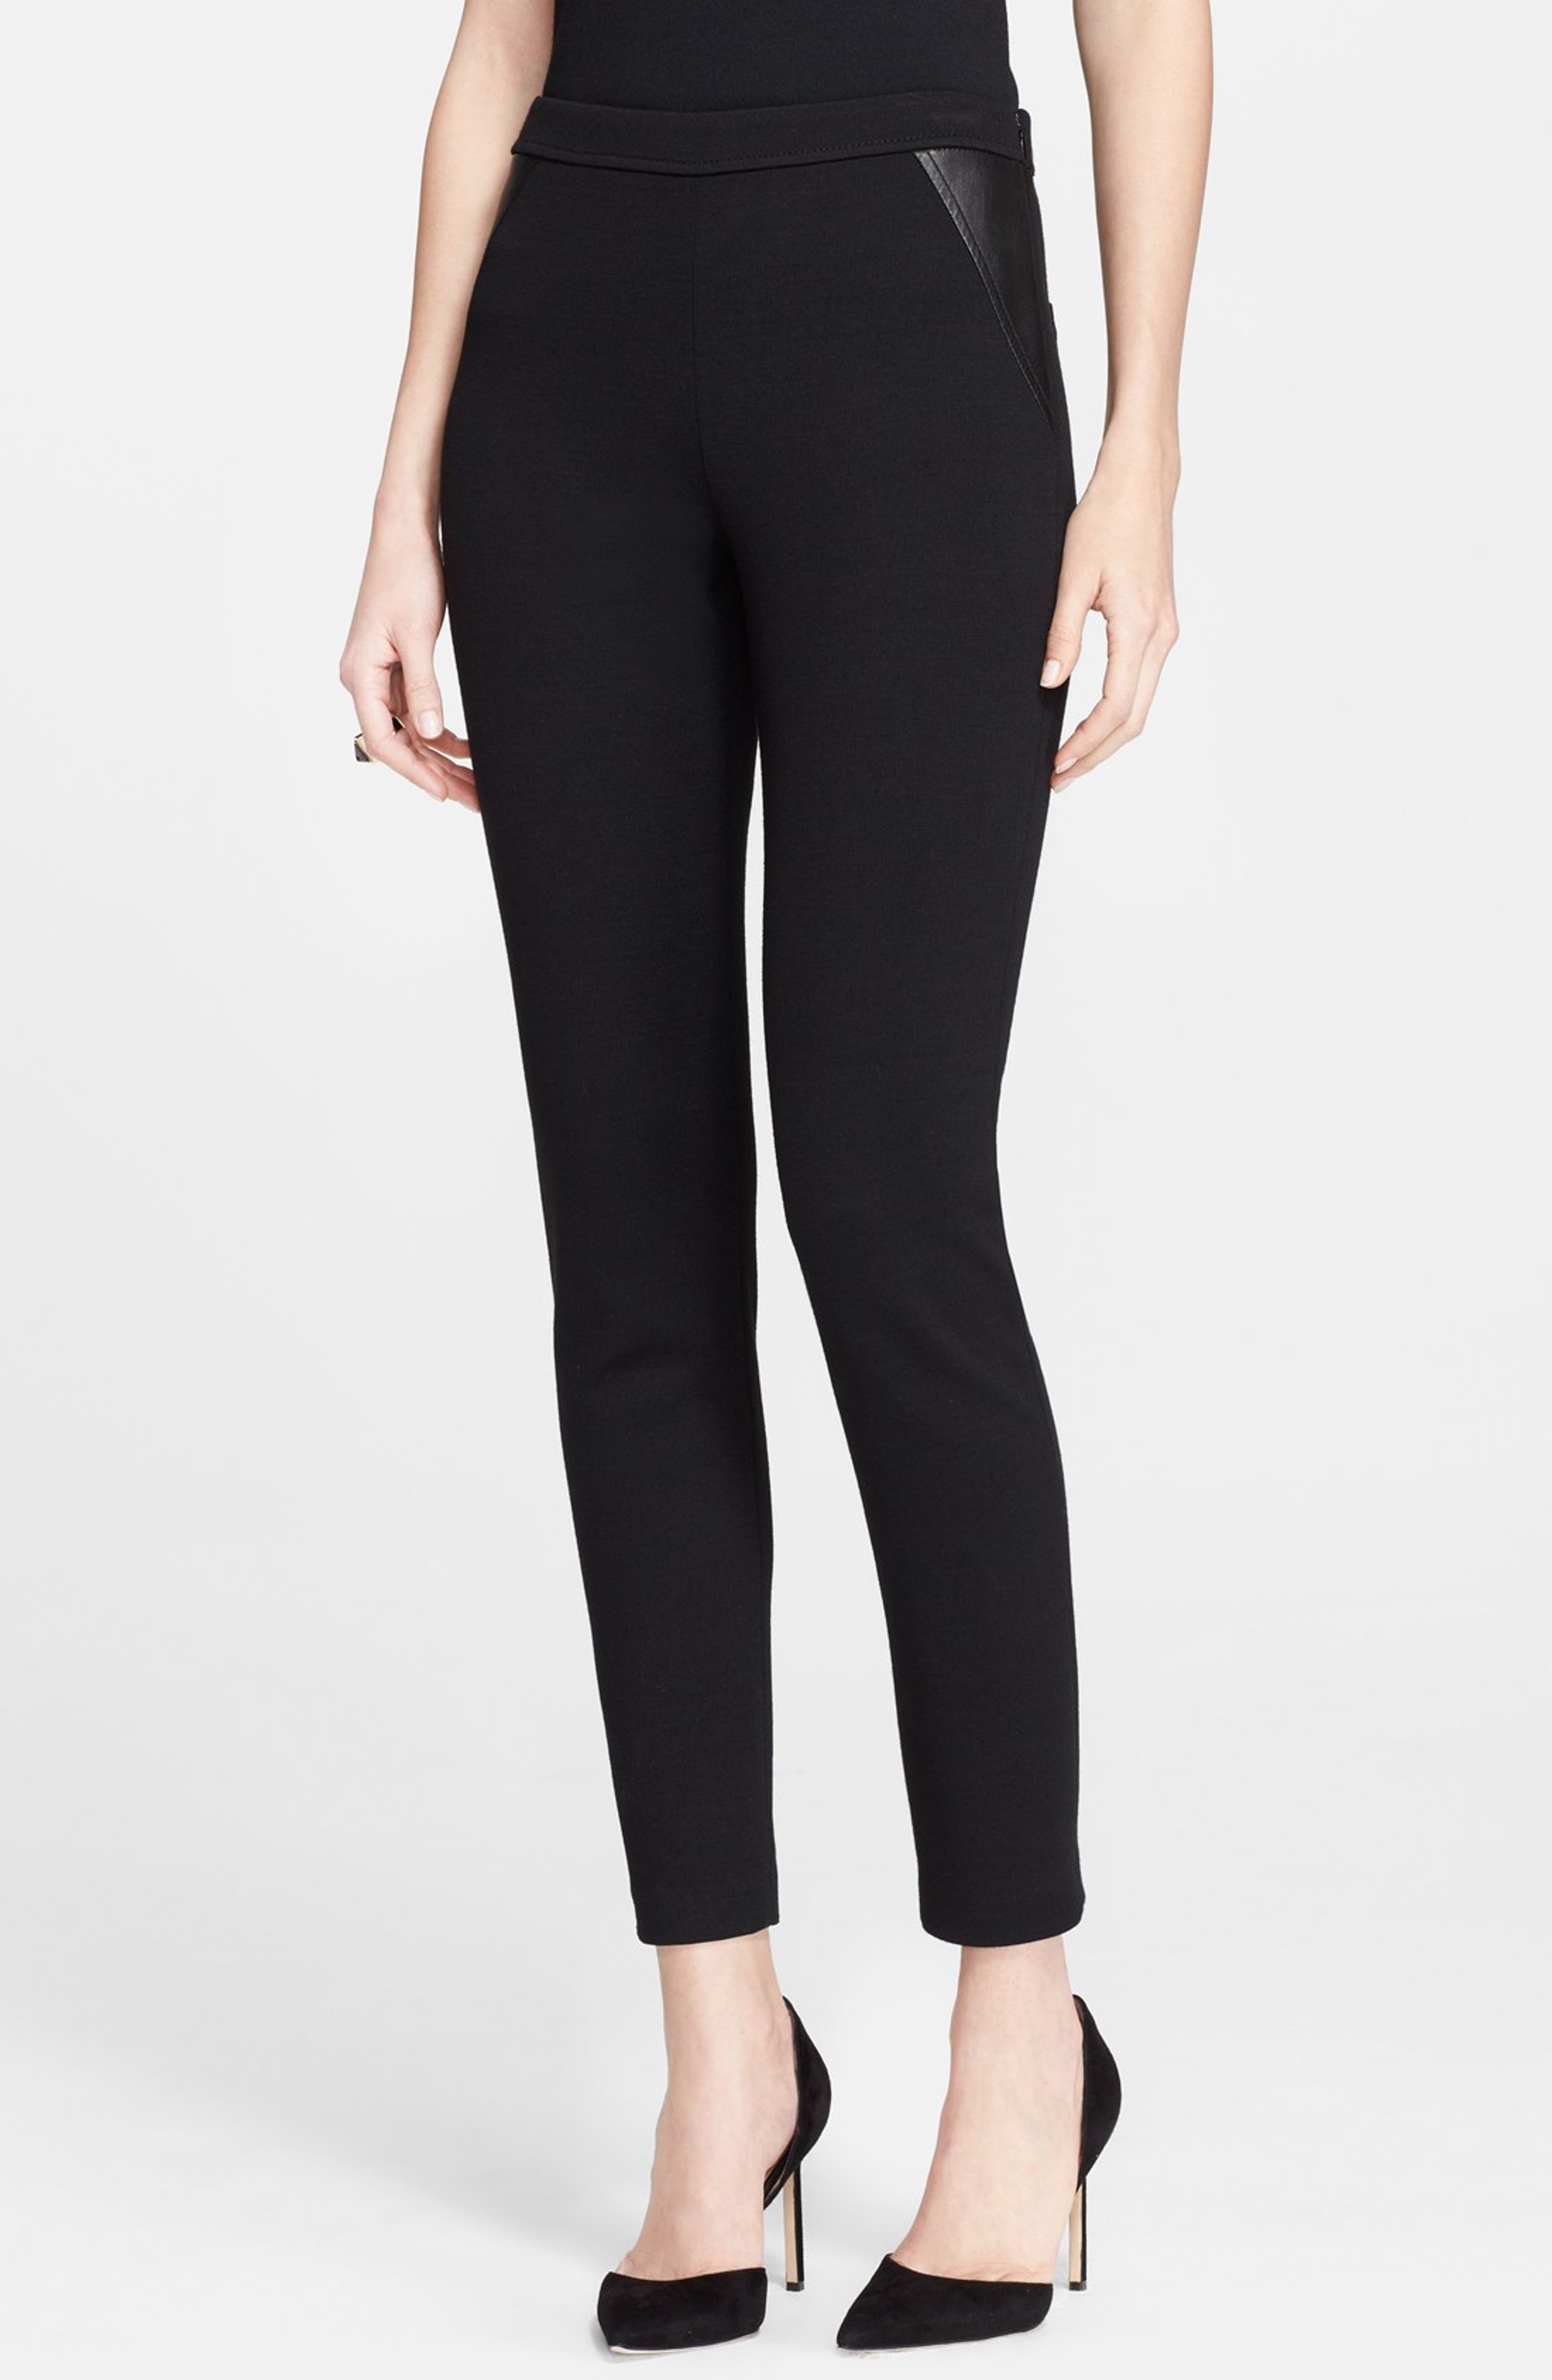 St. John Collection 'Alexa' Leather Trim Milano Knit Pants | Nordstrom